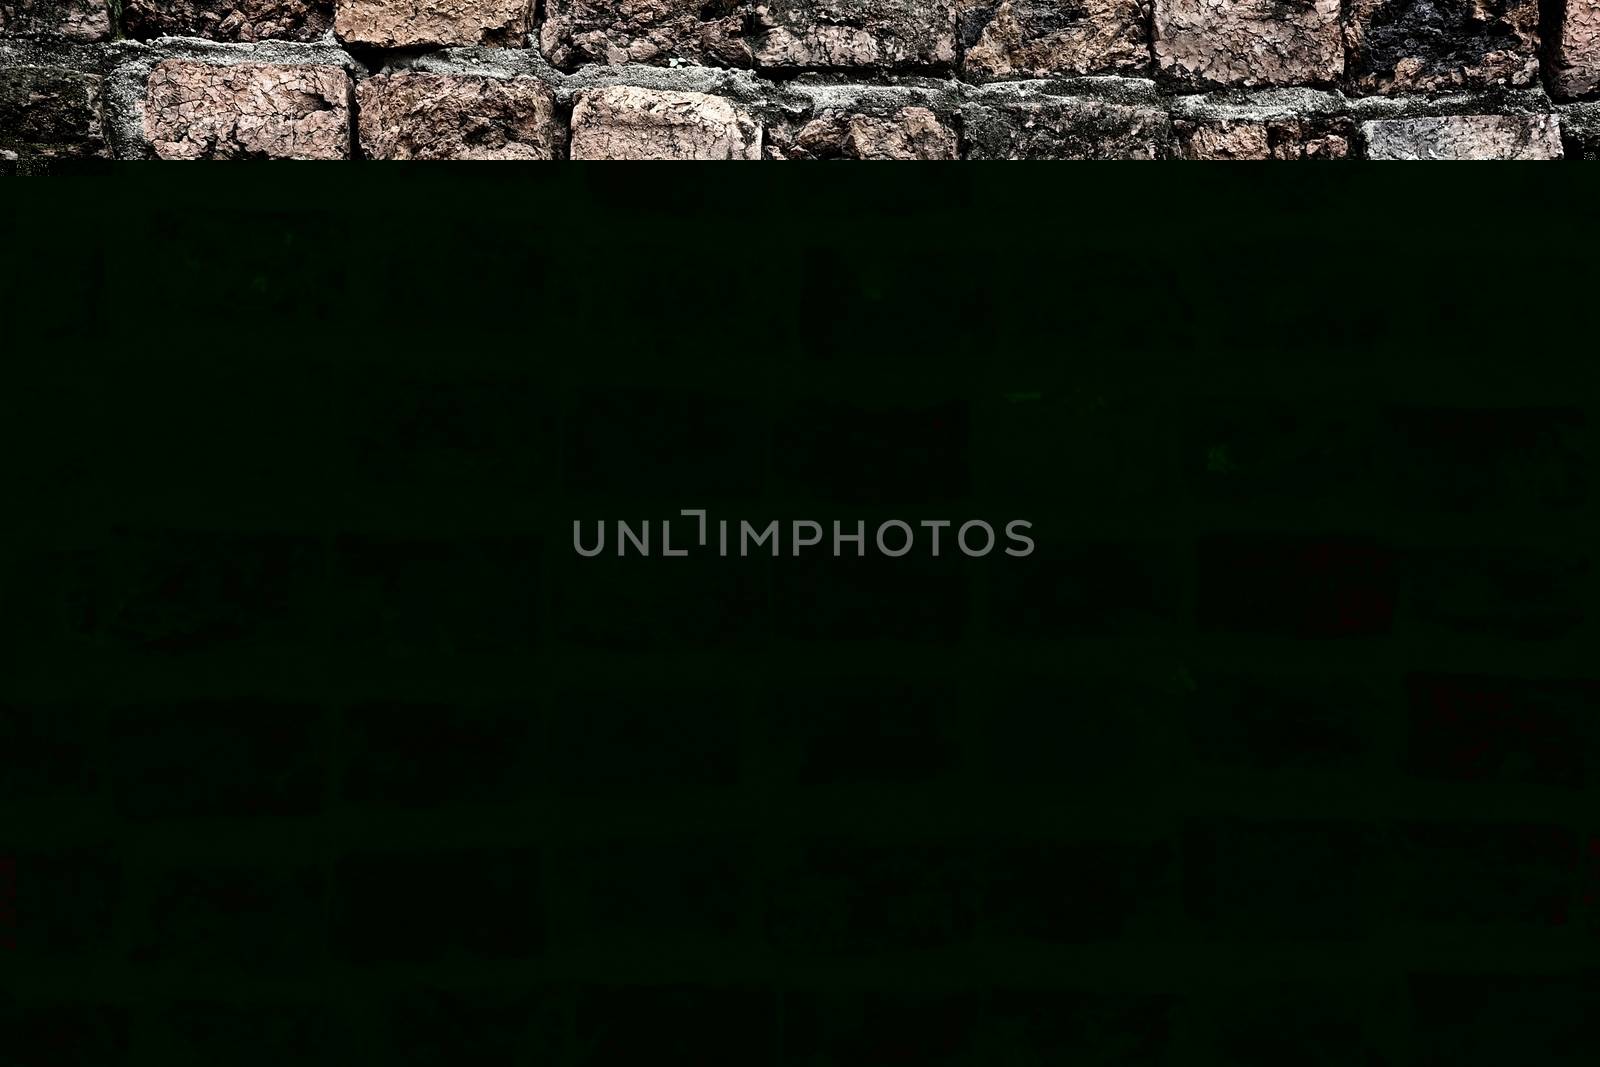 Old Brick Wall Texture Background.